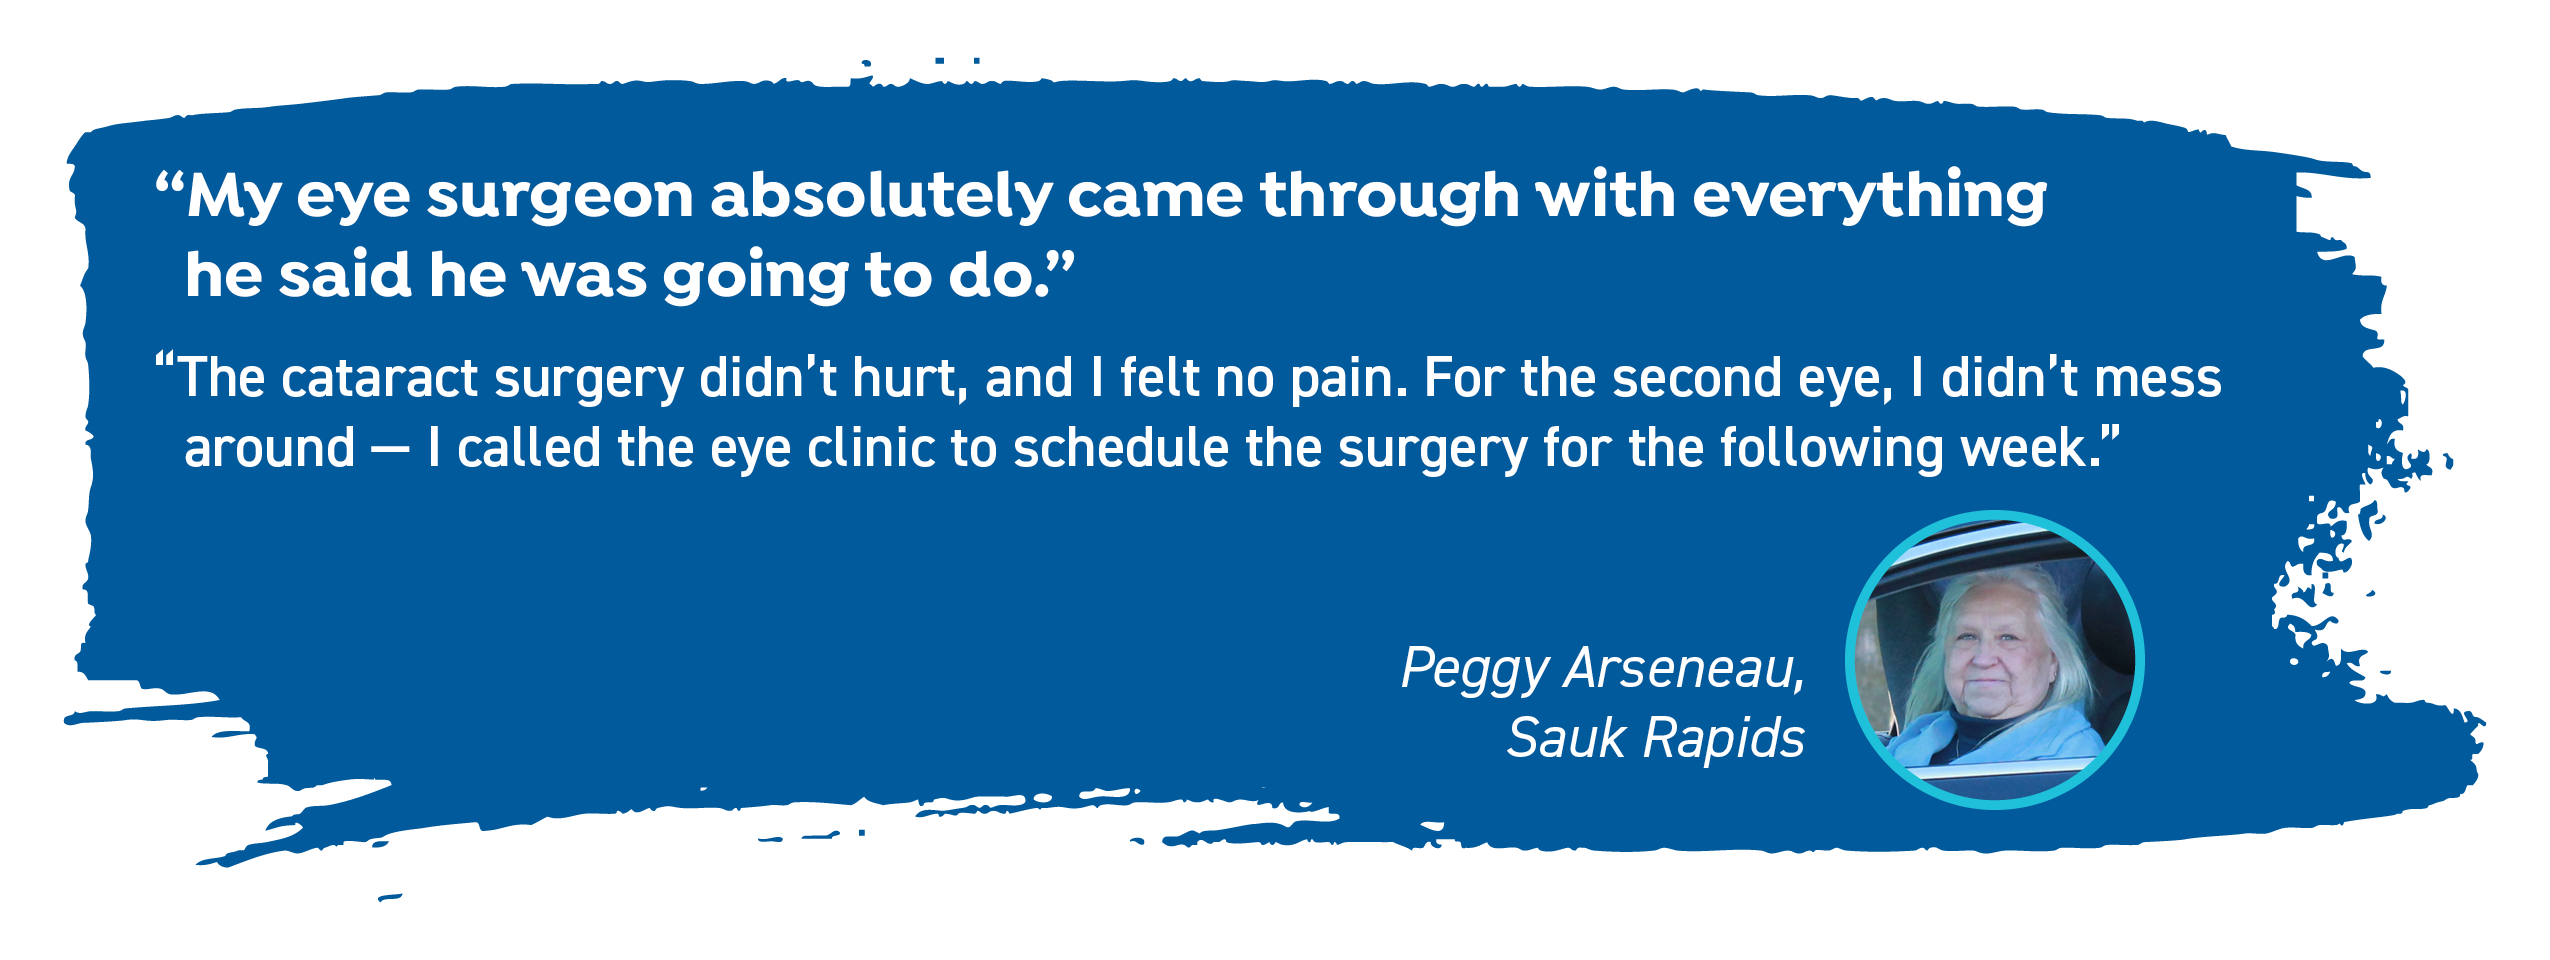 Peggy Arseneau of Sauk Rapids says, "My eye surgeon absolutely came through with everything he said he was going to do. The cataract surgery didn't hurt, and I felt no pain. For the second eye, I didn't mess around - I called the eye clinic to schedule the surgery for the following week."